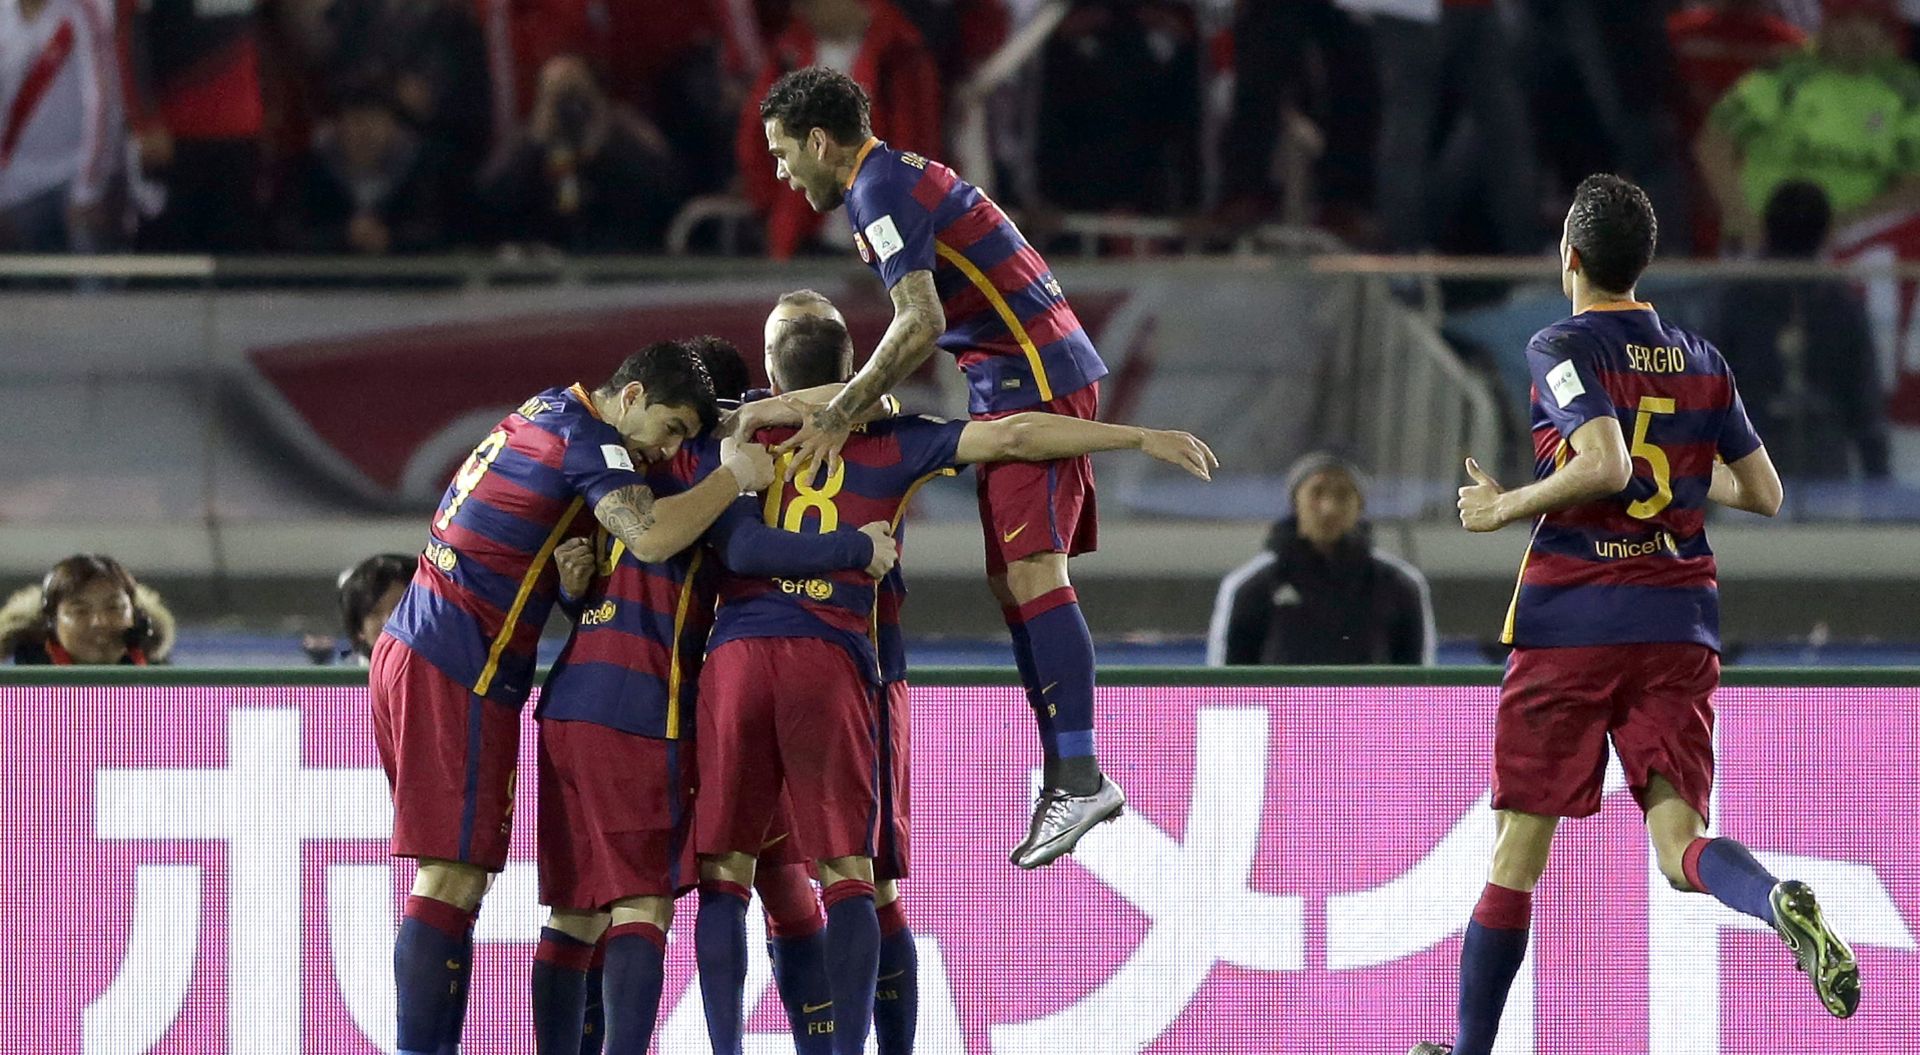 epa05076299 Barcelona's forward Lionel Messi (2nd L) celebrates together with his team mates after scoring the 1-0 lead during the final match of the FIFA Club World Cup 2015 between FC Barcelona and River Plate in Yokohama, south of Tokyo, Japan, 20 December 2015  EPA/KIYOSHI OTA